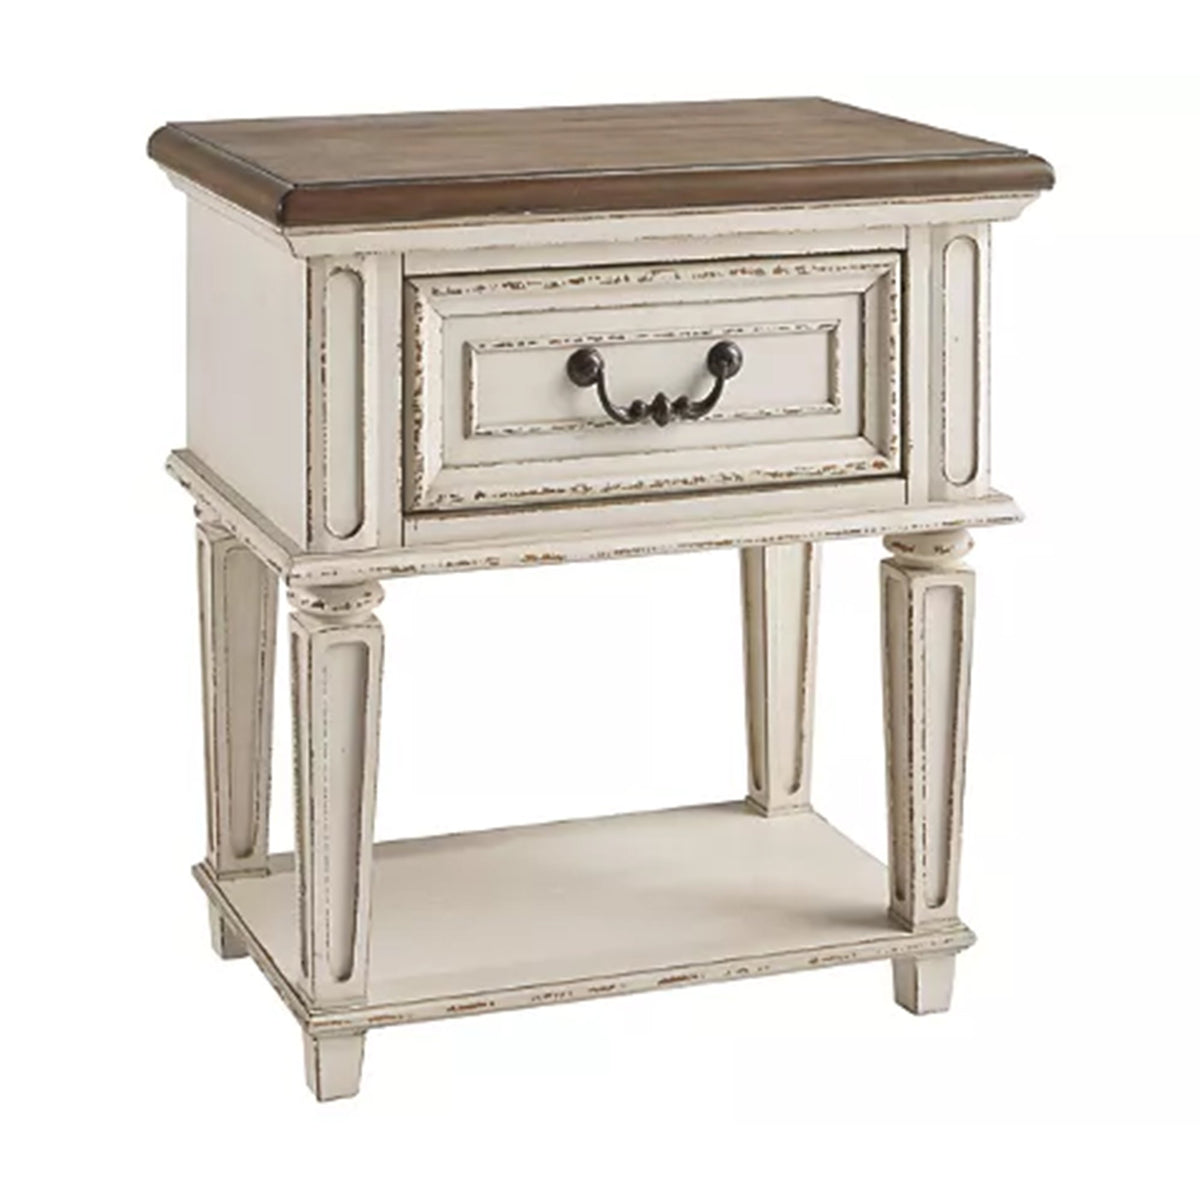 1 Drawer Wooden Frame Nightstand with Tapered Legs, Brown and Antique White - BM215071